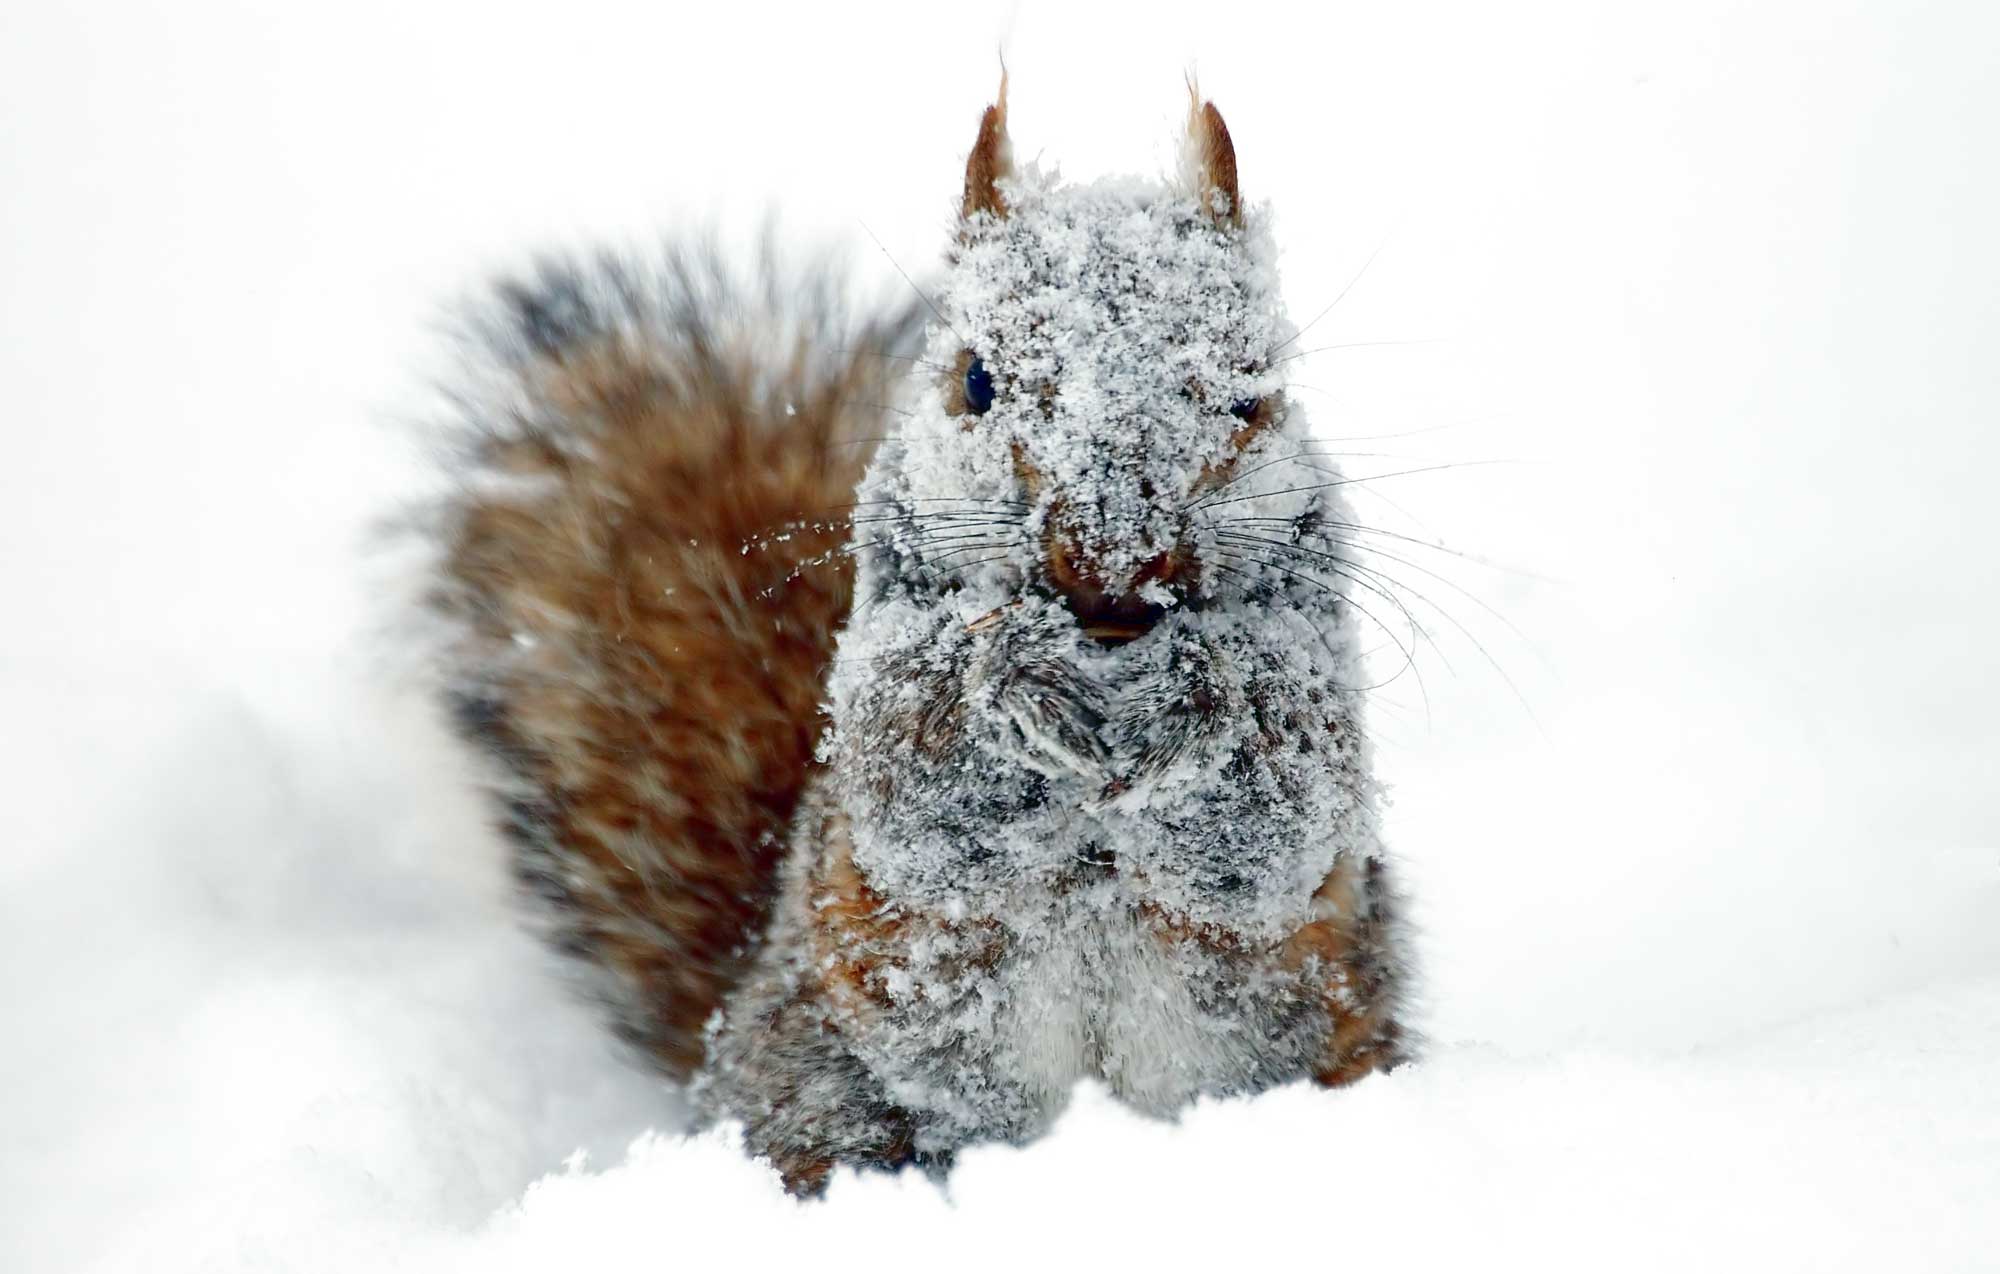 A gray squirrel in the snow with snow all over its fur.